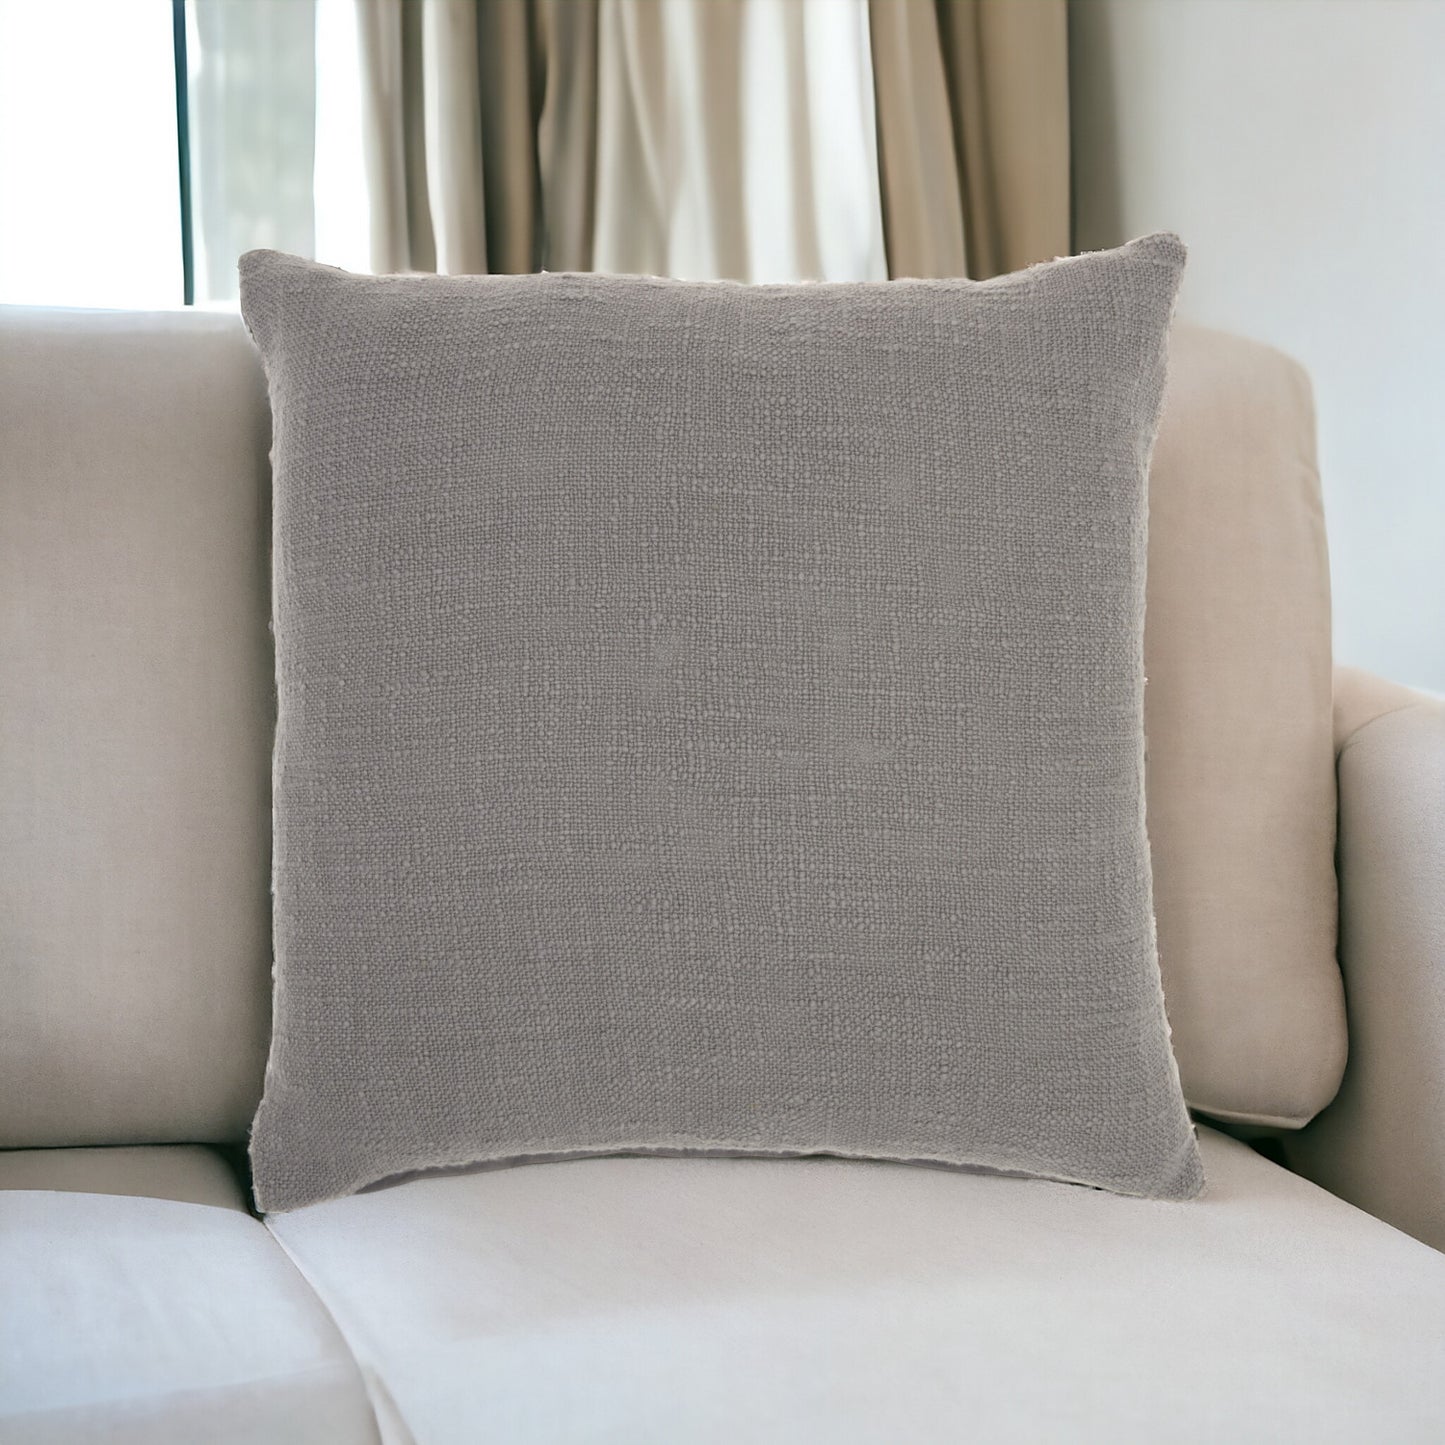 Gray Solid Woven Throw Pillow